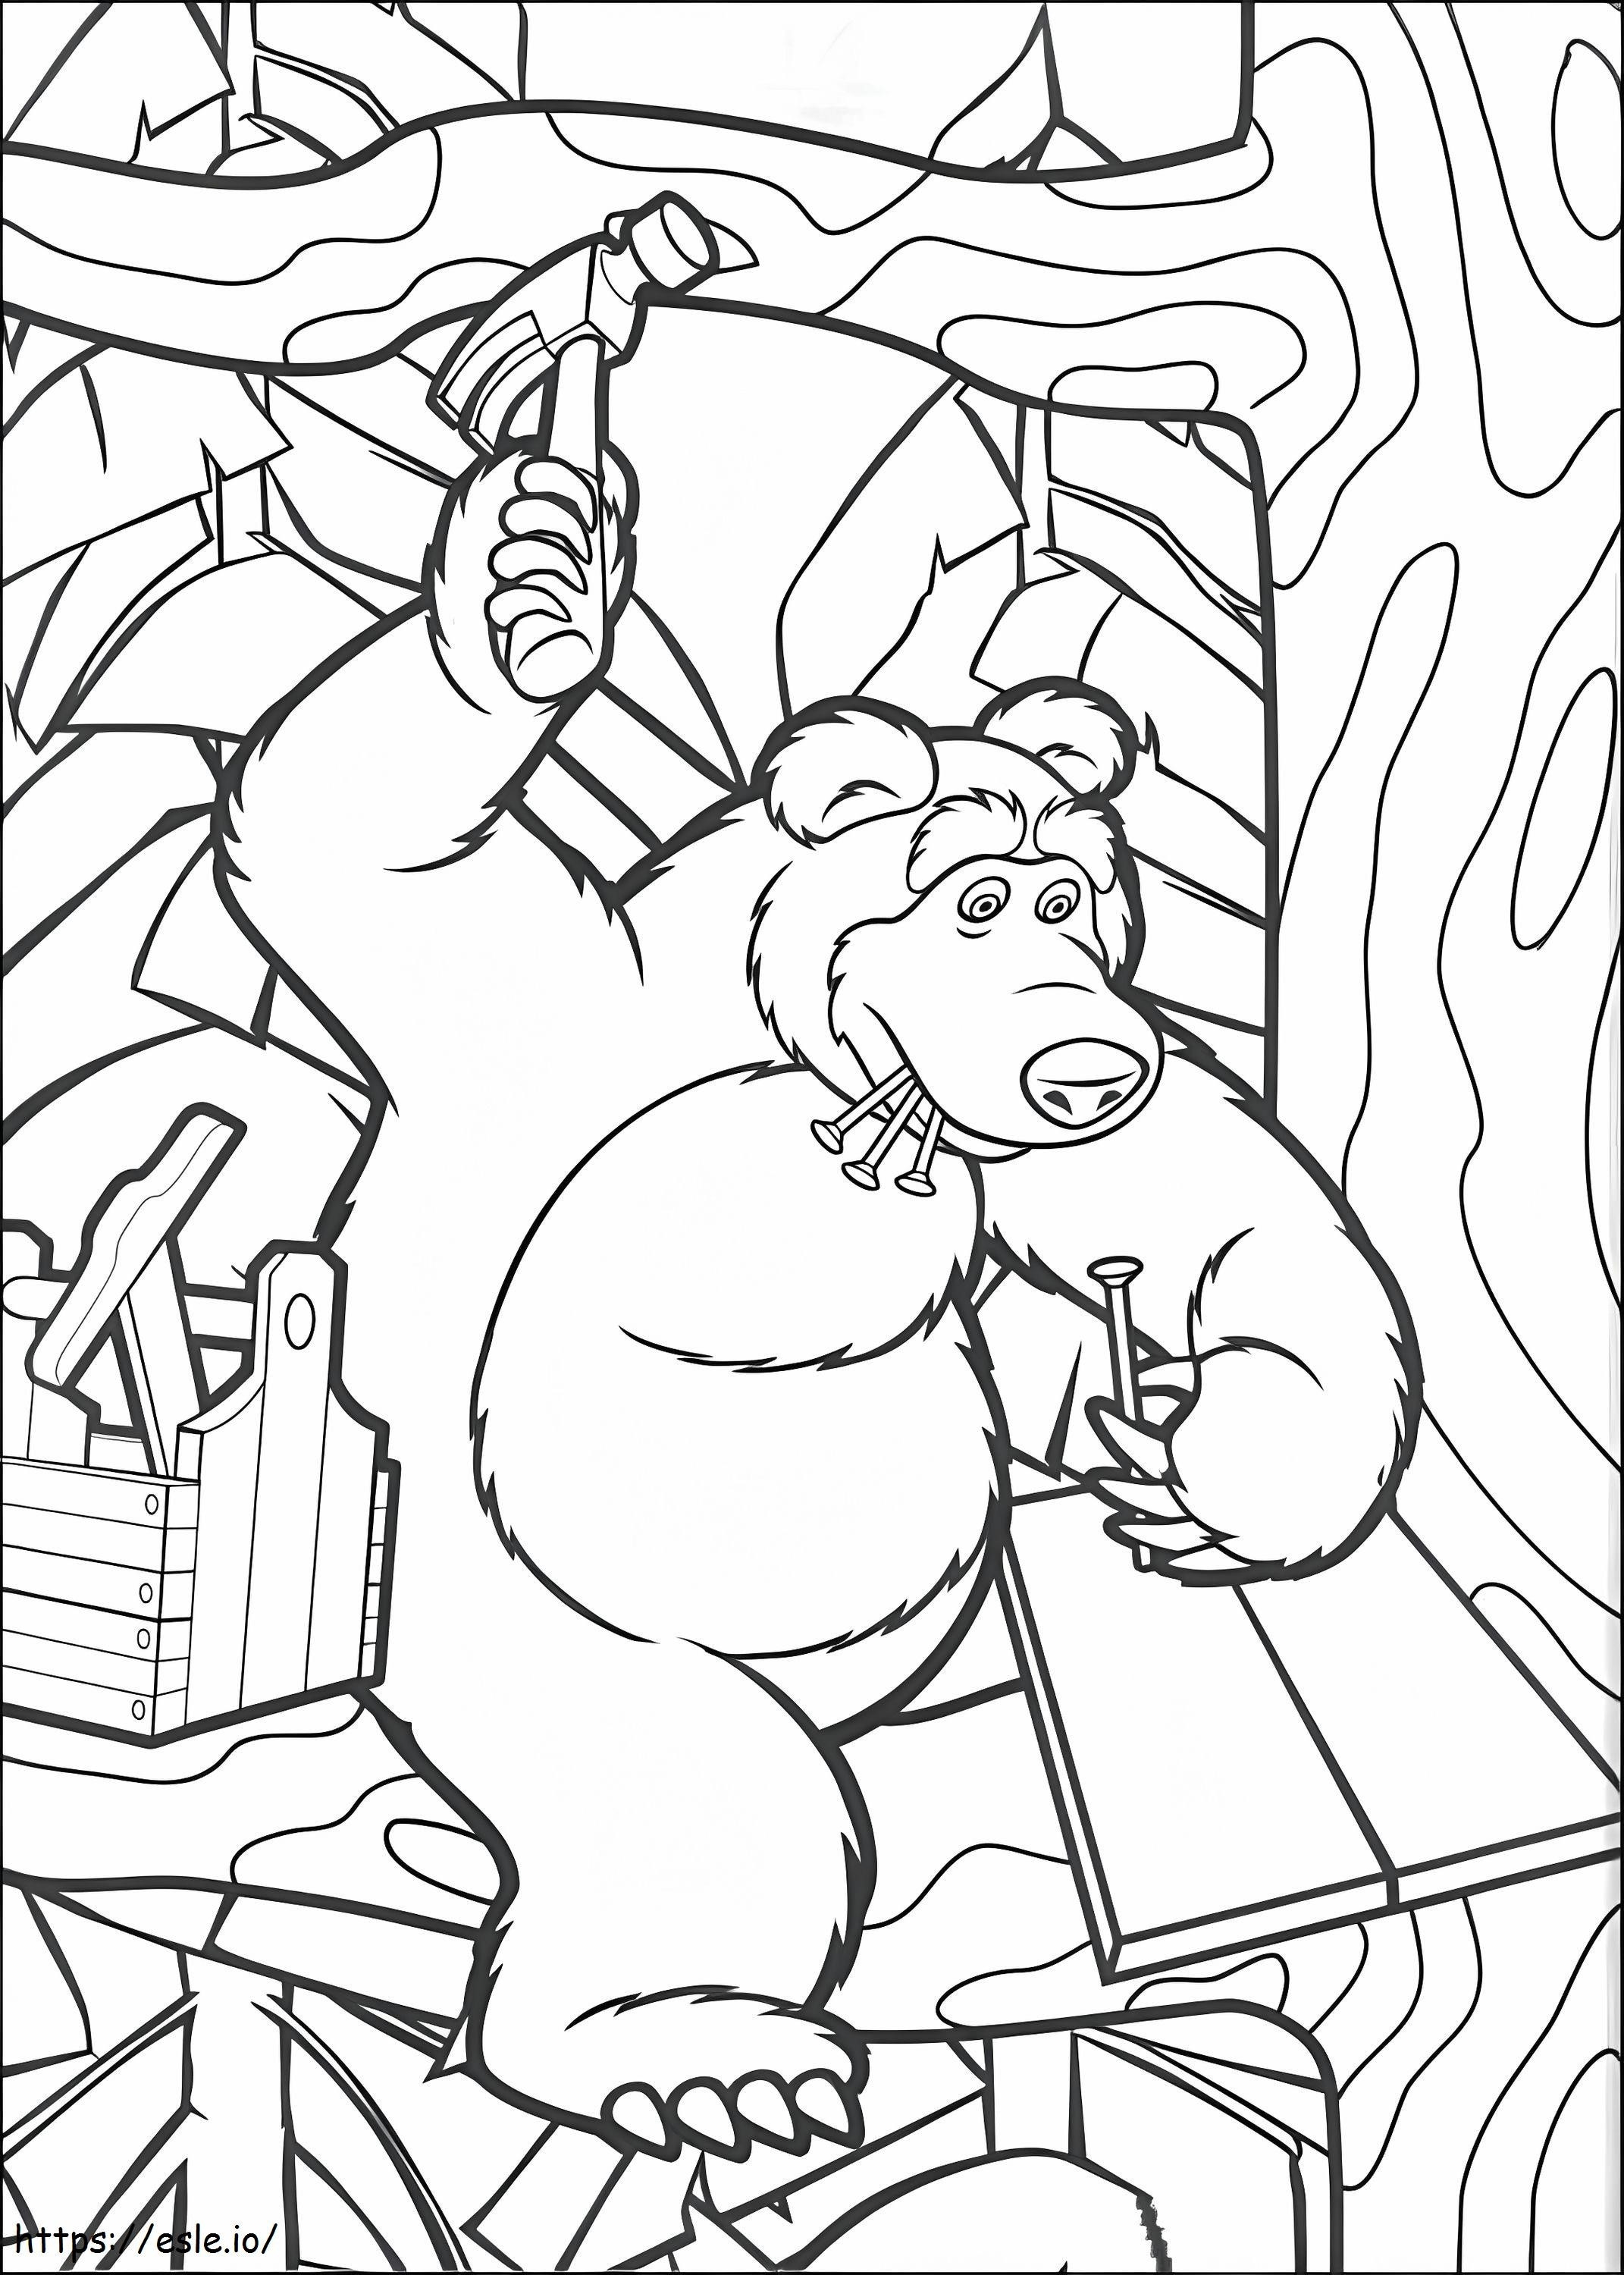 The Bear Is Working coloring page